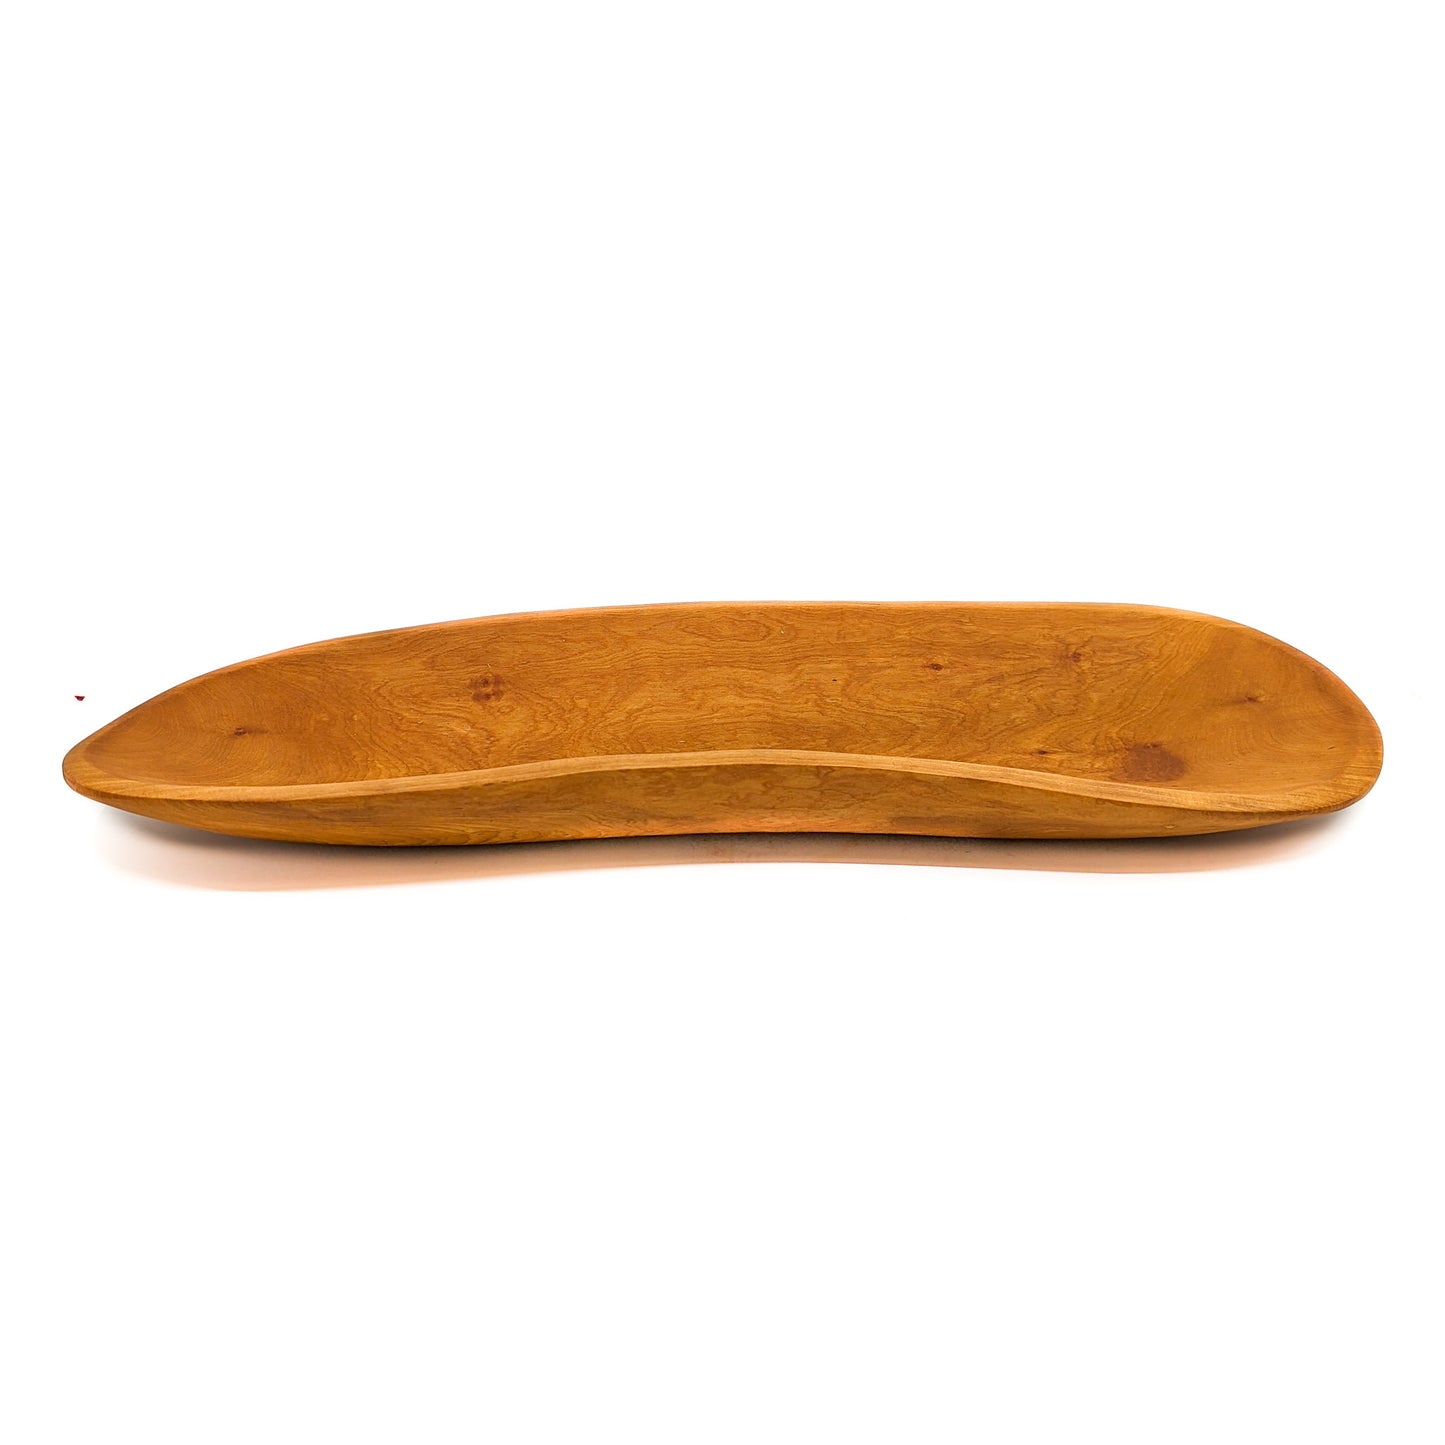 Sculptural Madrone Wood Bowl - Hand Carved